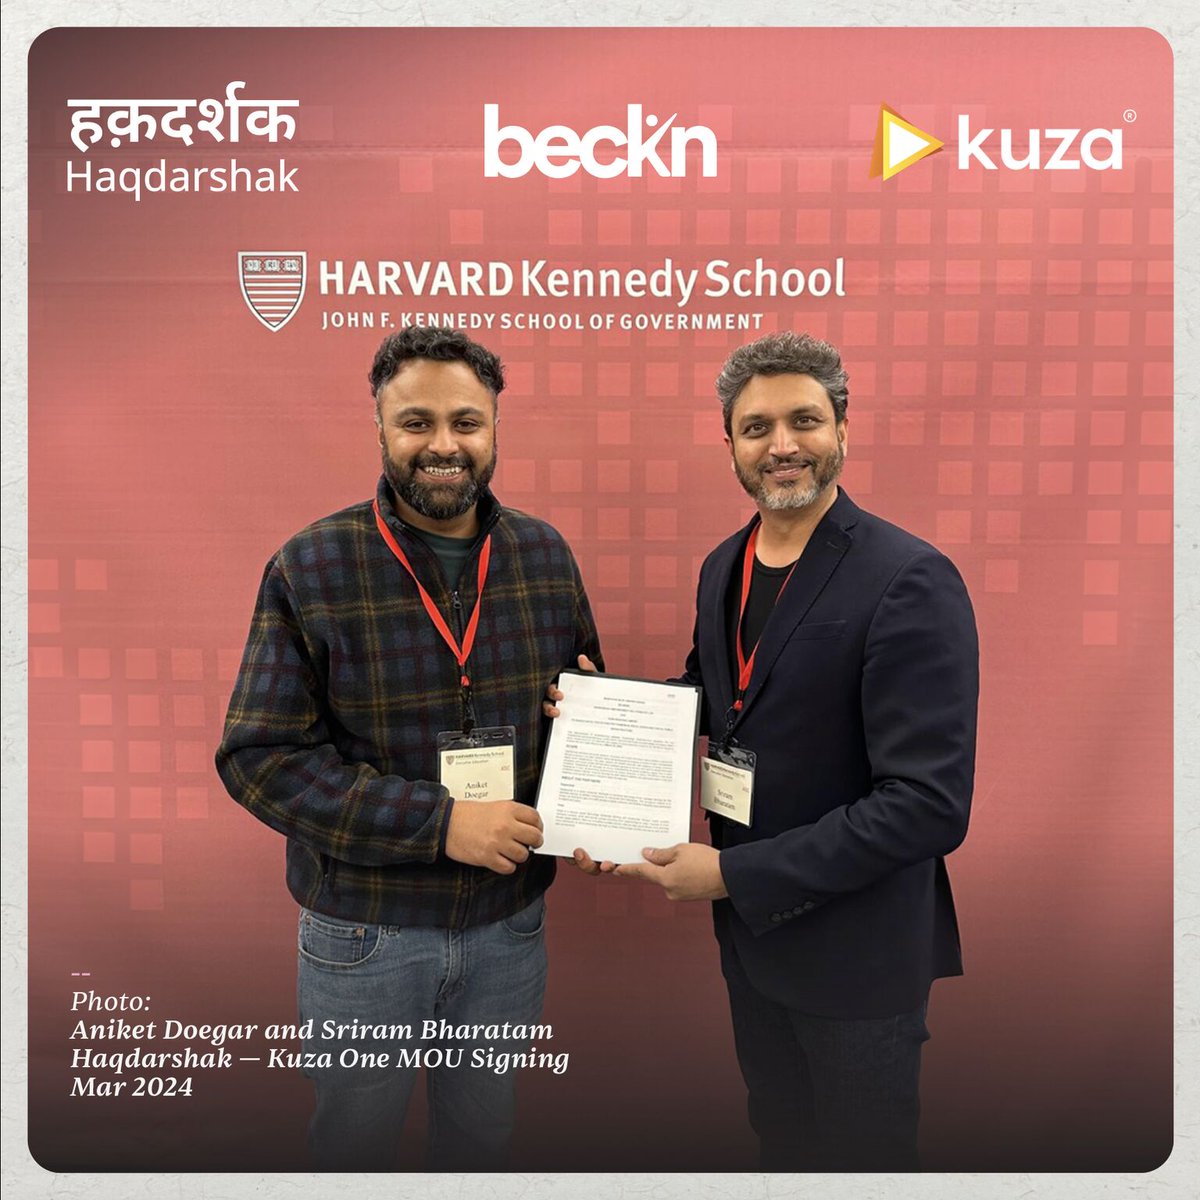 We’re delighted to share that @haqdarshak and Kuza One (@Kuza_Biashara) are partnering to build a welfare schemes discovery solution using #Beckn for farmers in Kenya.

The collaboration will leverage Haqdarshak’s tech, Kuza’s agripreneur expertise in Kenya and Kuza's open